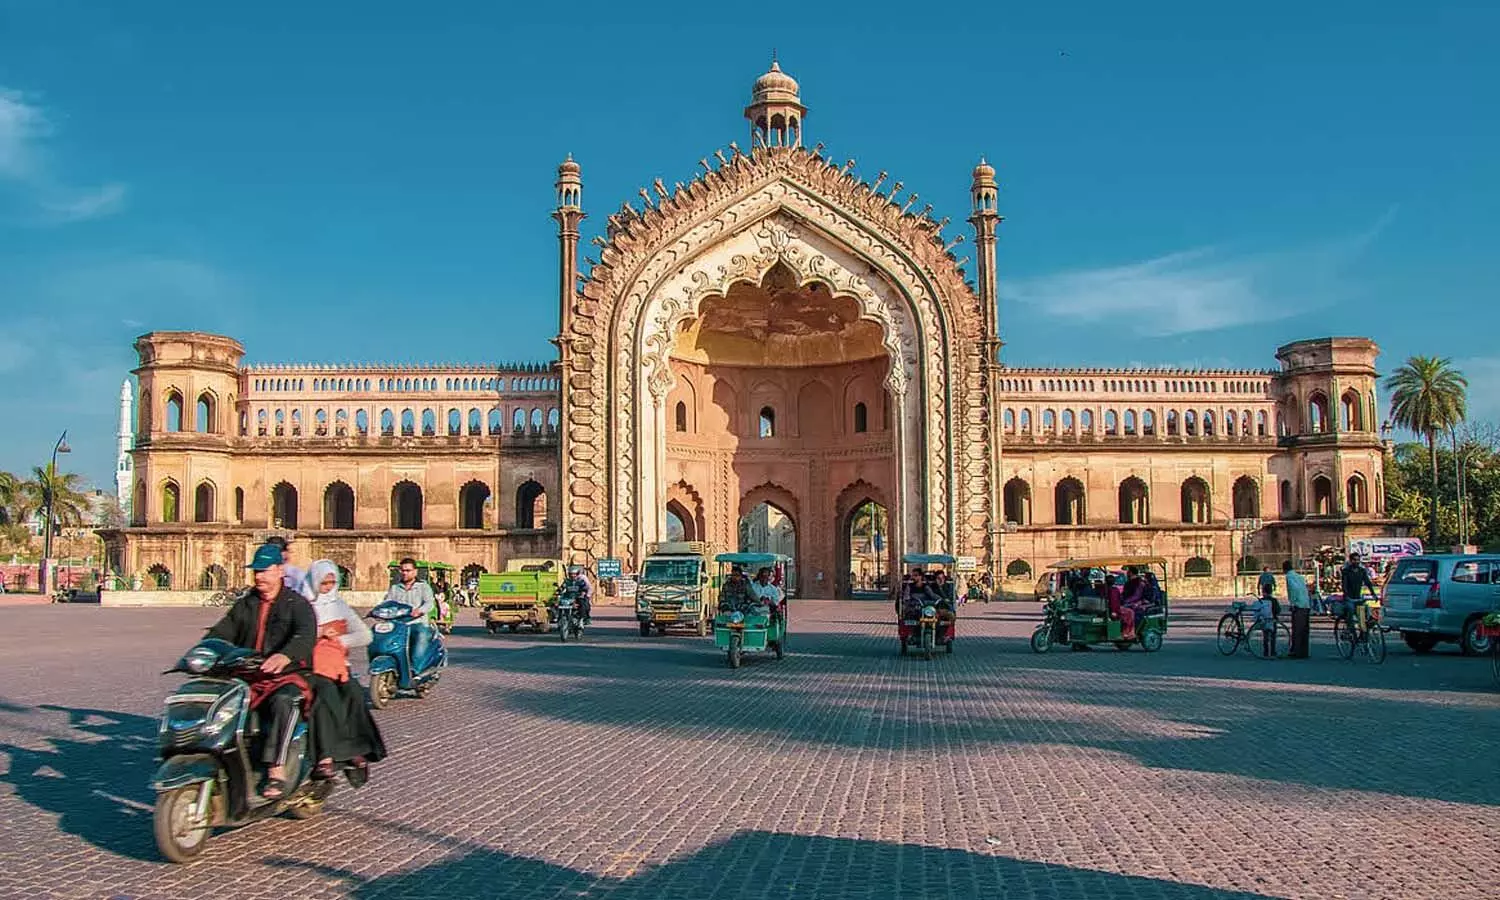 In danger, the Rumi Darwaza of Lucknow vibrates when vehicles pass